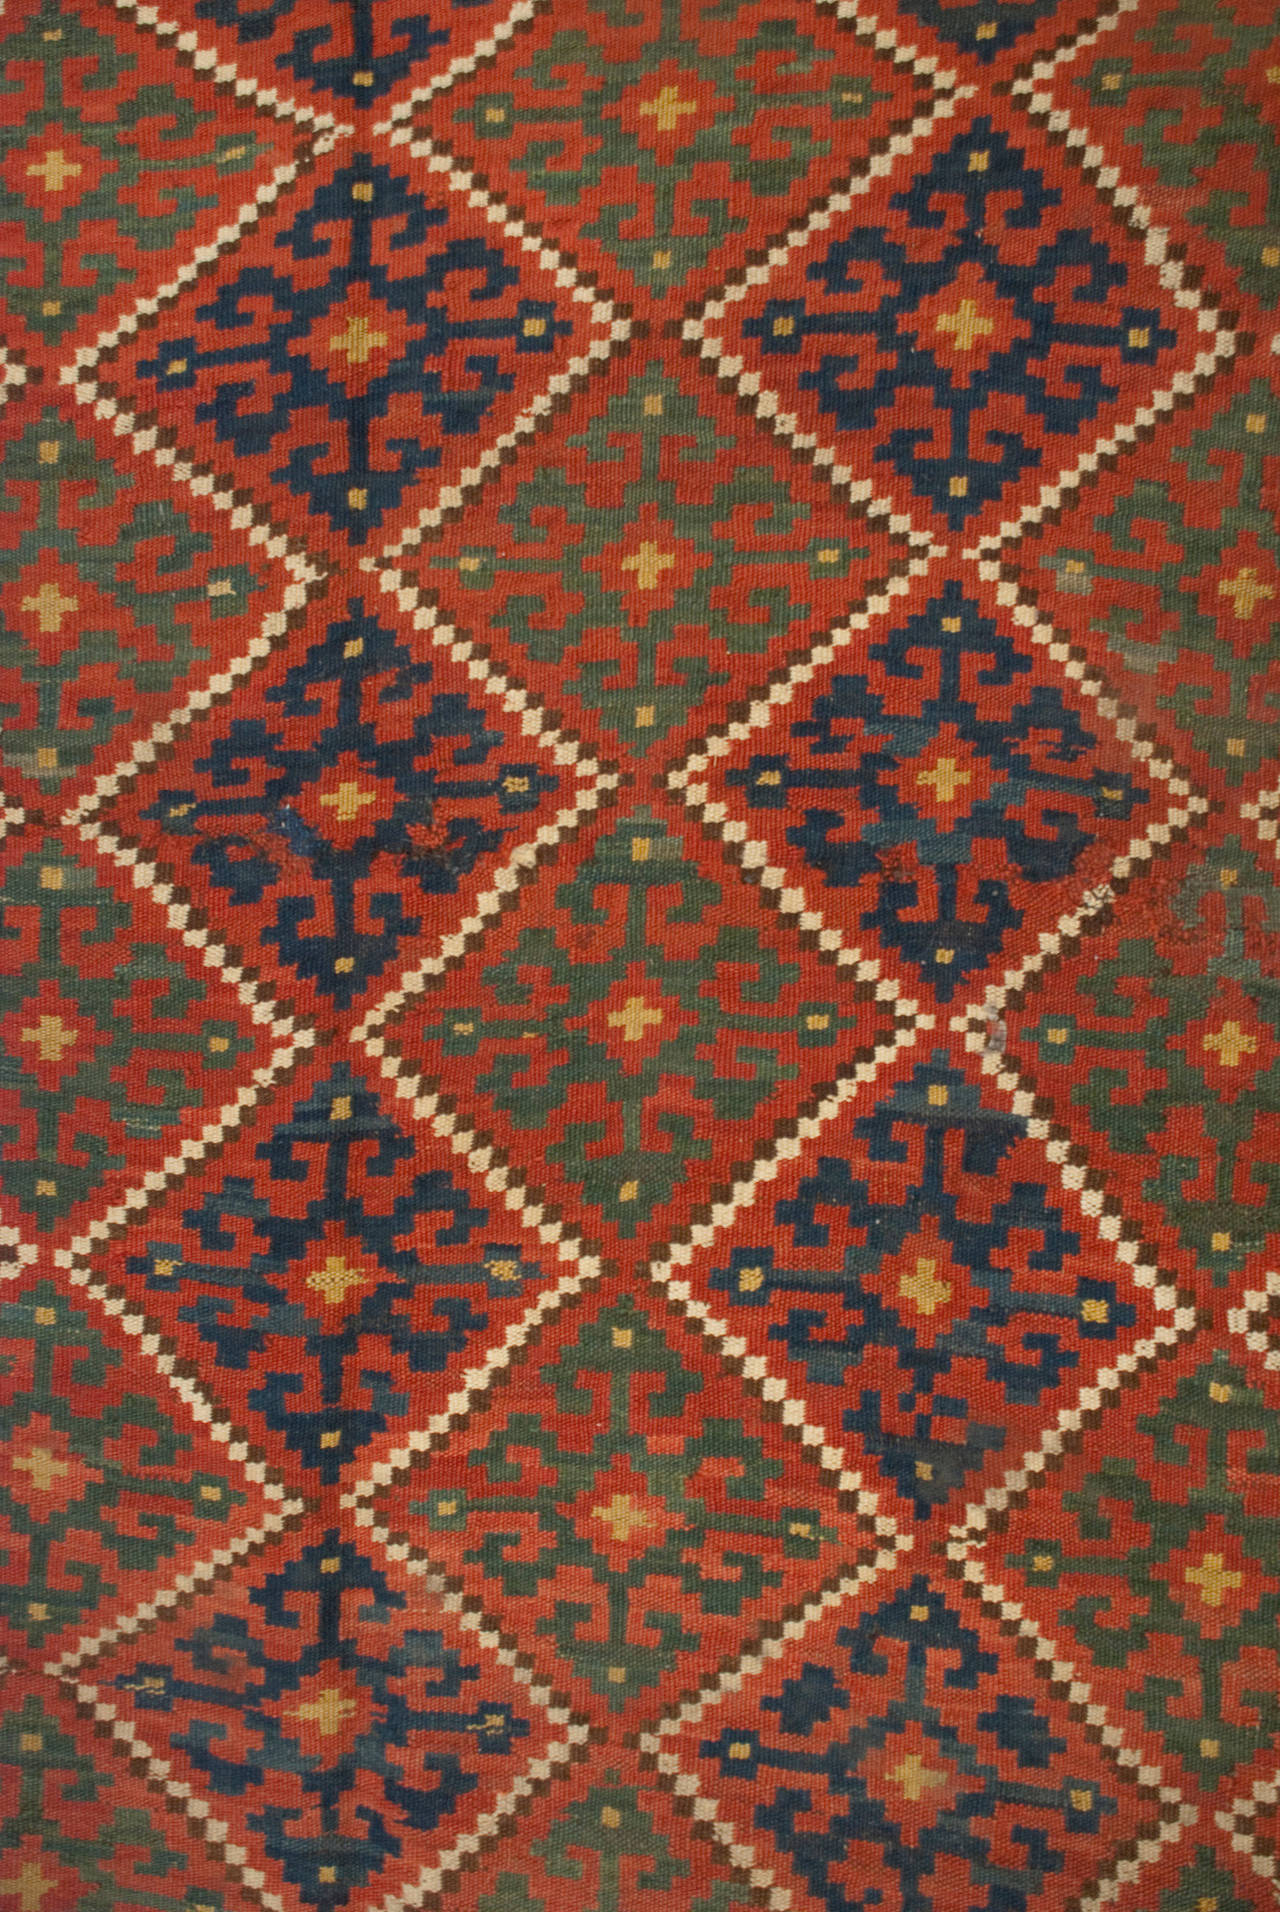 An early 20th century Persian Ersari Kilim rug with a wonderful all-over geometric crimson, emerald, and indigo diamond pattern surrounded by a complementary geometric border.